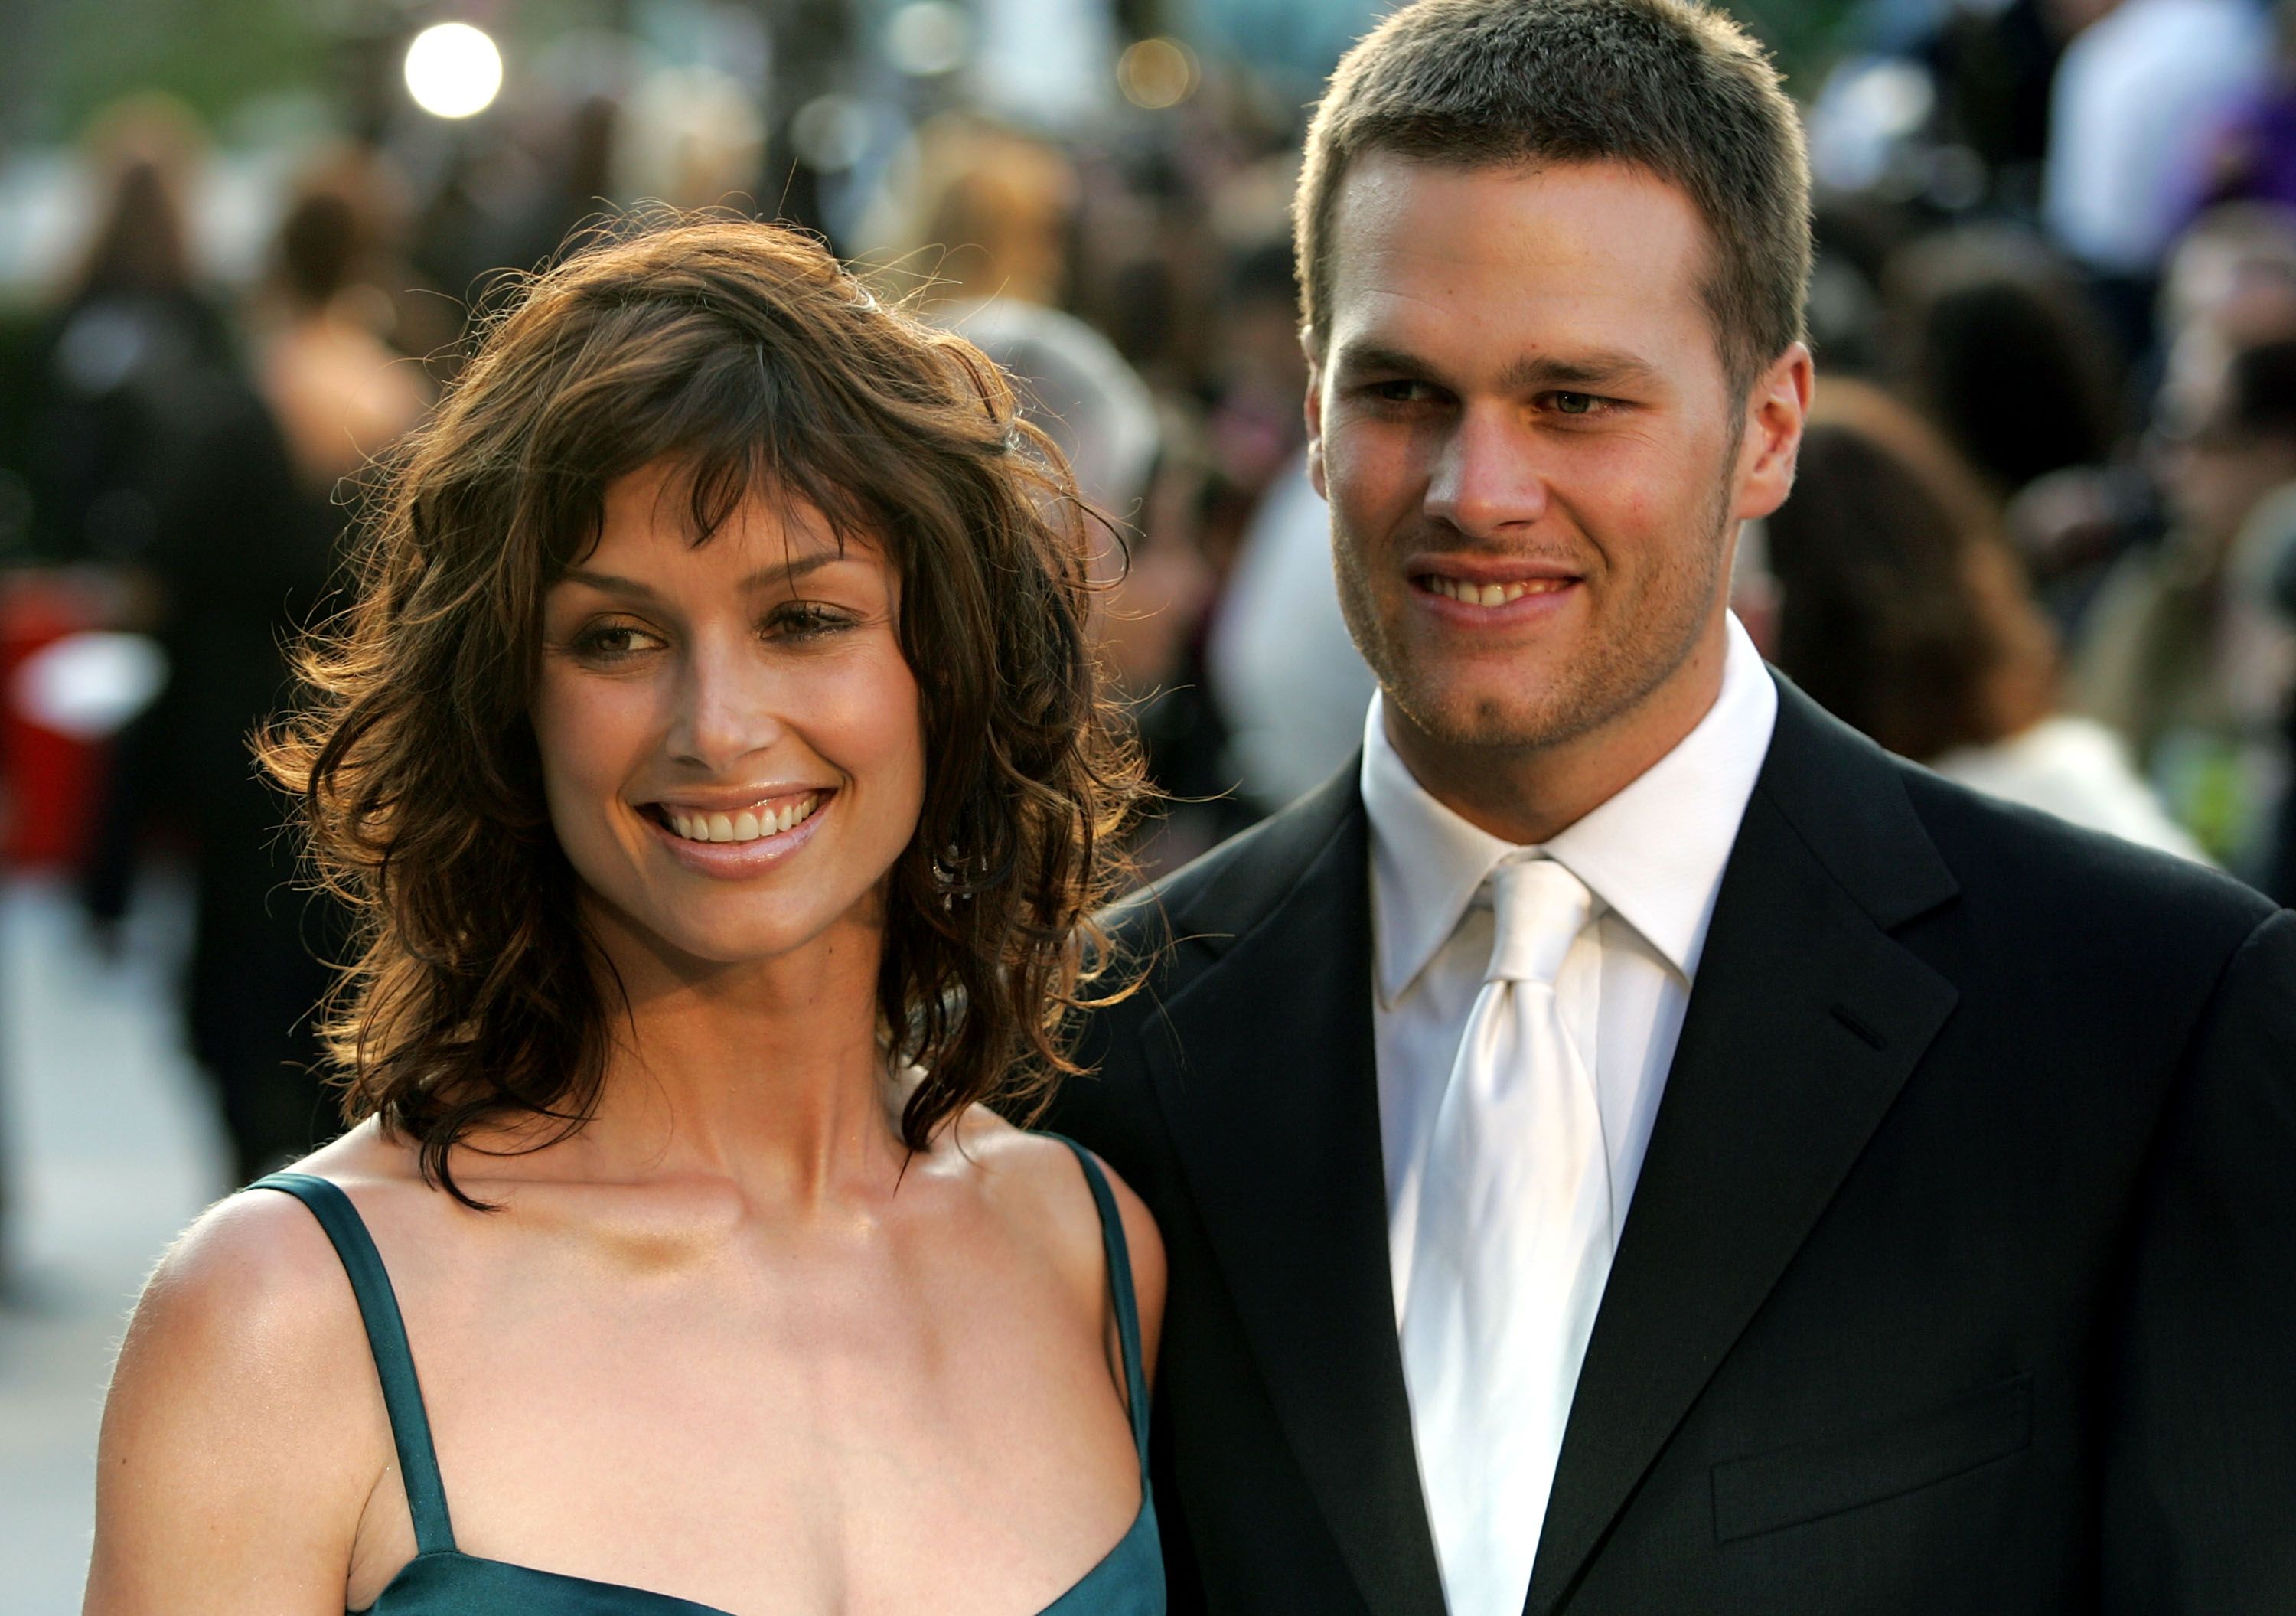 Bridget Moynahan and Tom Brady at the Vanity Fair Oscar Party at Mortons on February 27, 2005 | Photo: Getty Images